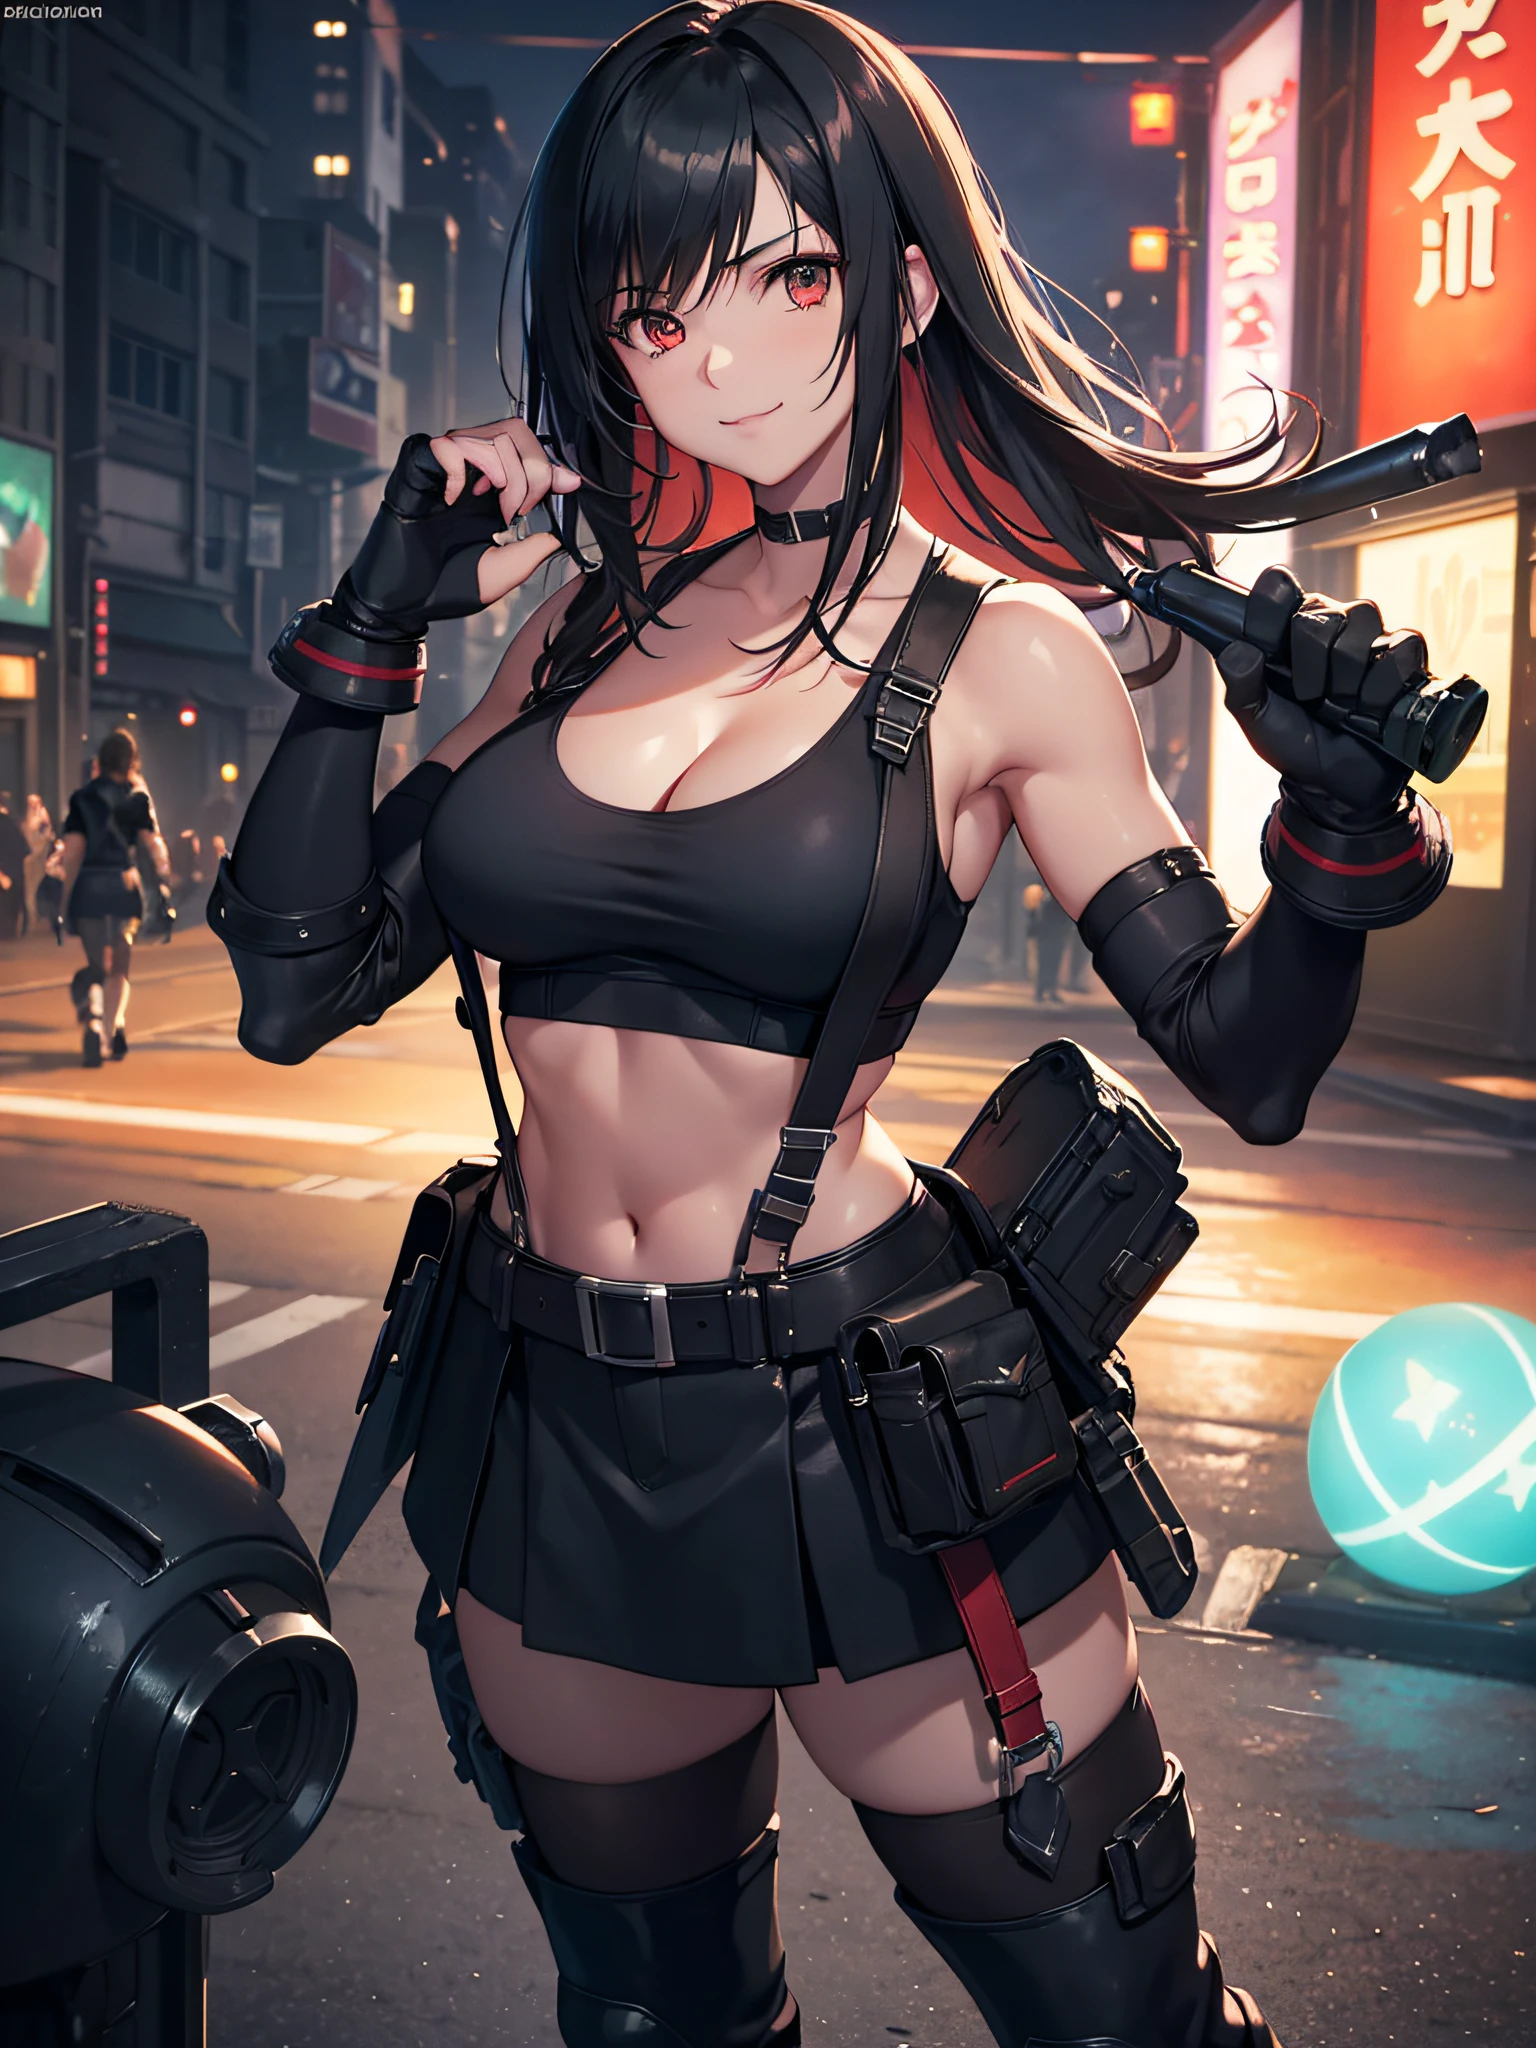 (8K, Best Quality, Masterpiece: 1.2), (Realistic, Photorealistic: 1.37), Super Detail, One Girl, Cute, Solo, (Tifa Lockhart), (Big Breasts), (Beautiful Eyes), (Smile: 1.2), Closed, Model Pose, (Green Neon), Cityscape, Depth of Field, Dark Strong Shadows, Sharp Focus, Motion Blur, Depth of Field, composition, , Final Fantasy VII, (nose brush), single elbow pads, ankle boots, black hair, red boots, elbow gloves, elbow pads, fingerless gloves, sports bra, black skirt (suspenders), white tank top: 1.5, full body, headrest, beautiful face, long hair, (red_eyes), (night: 1.5), complex, Cinematic Lighting, Photon Mapping, Radiosity, Physically Based Rendering, (Tetsuya Nomura style), Perfect Breast, Cleavage: 1.2,